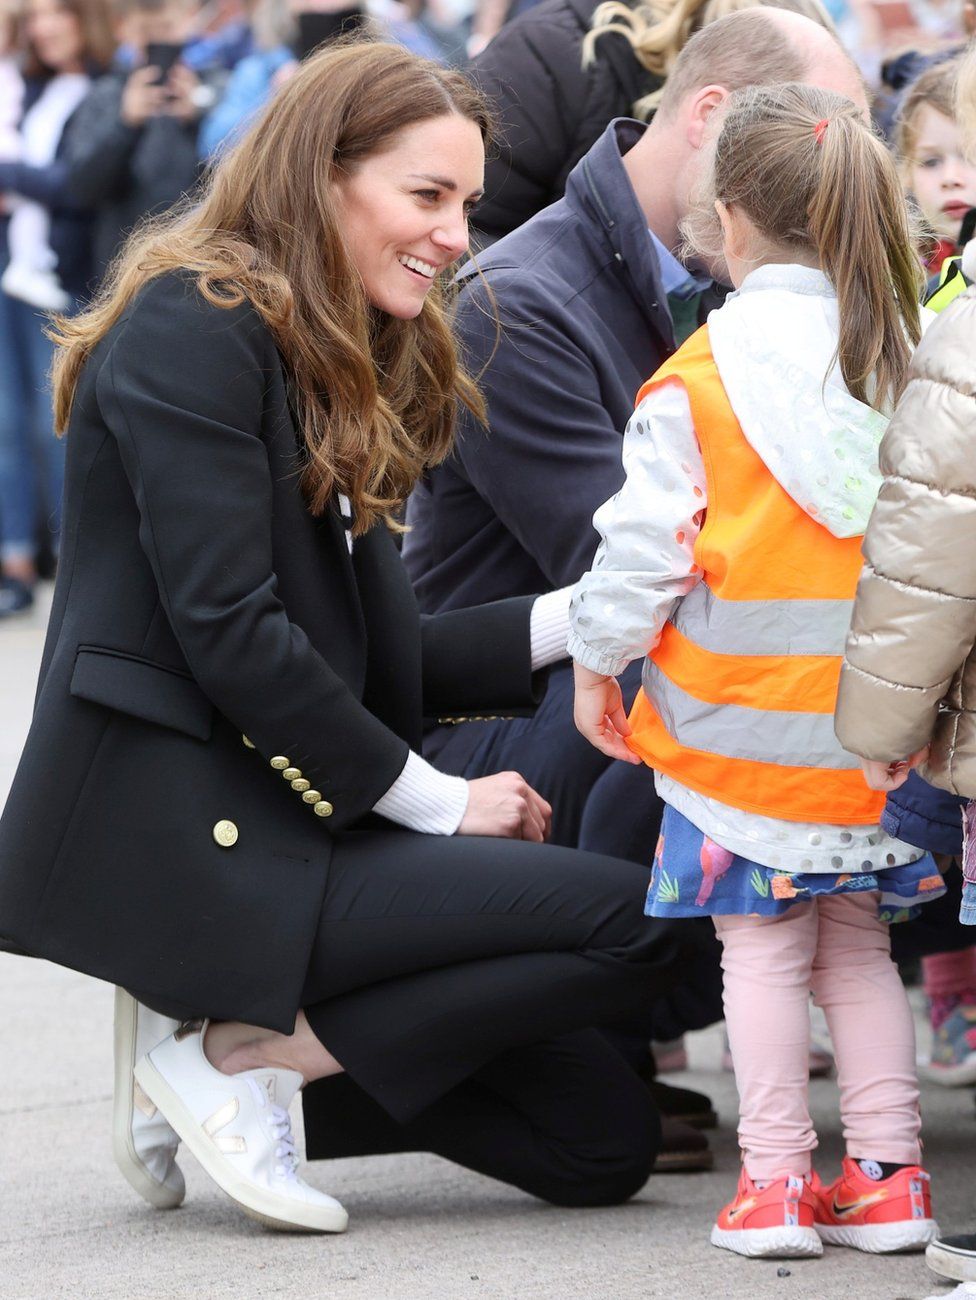 William and Kate speak to young children as they visited local fishermen and their families